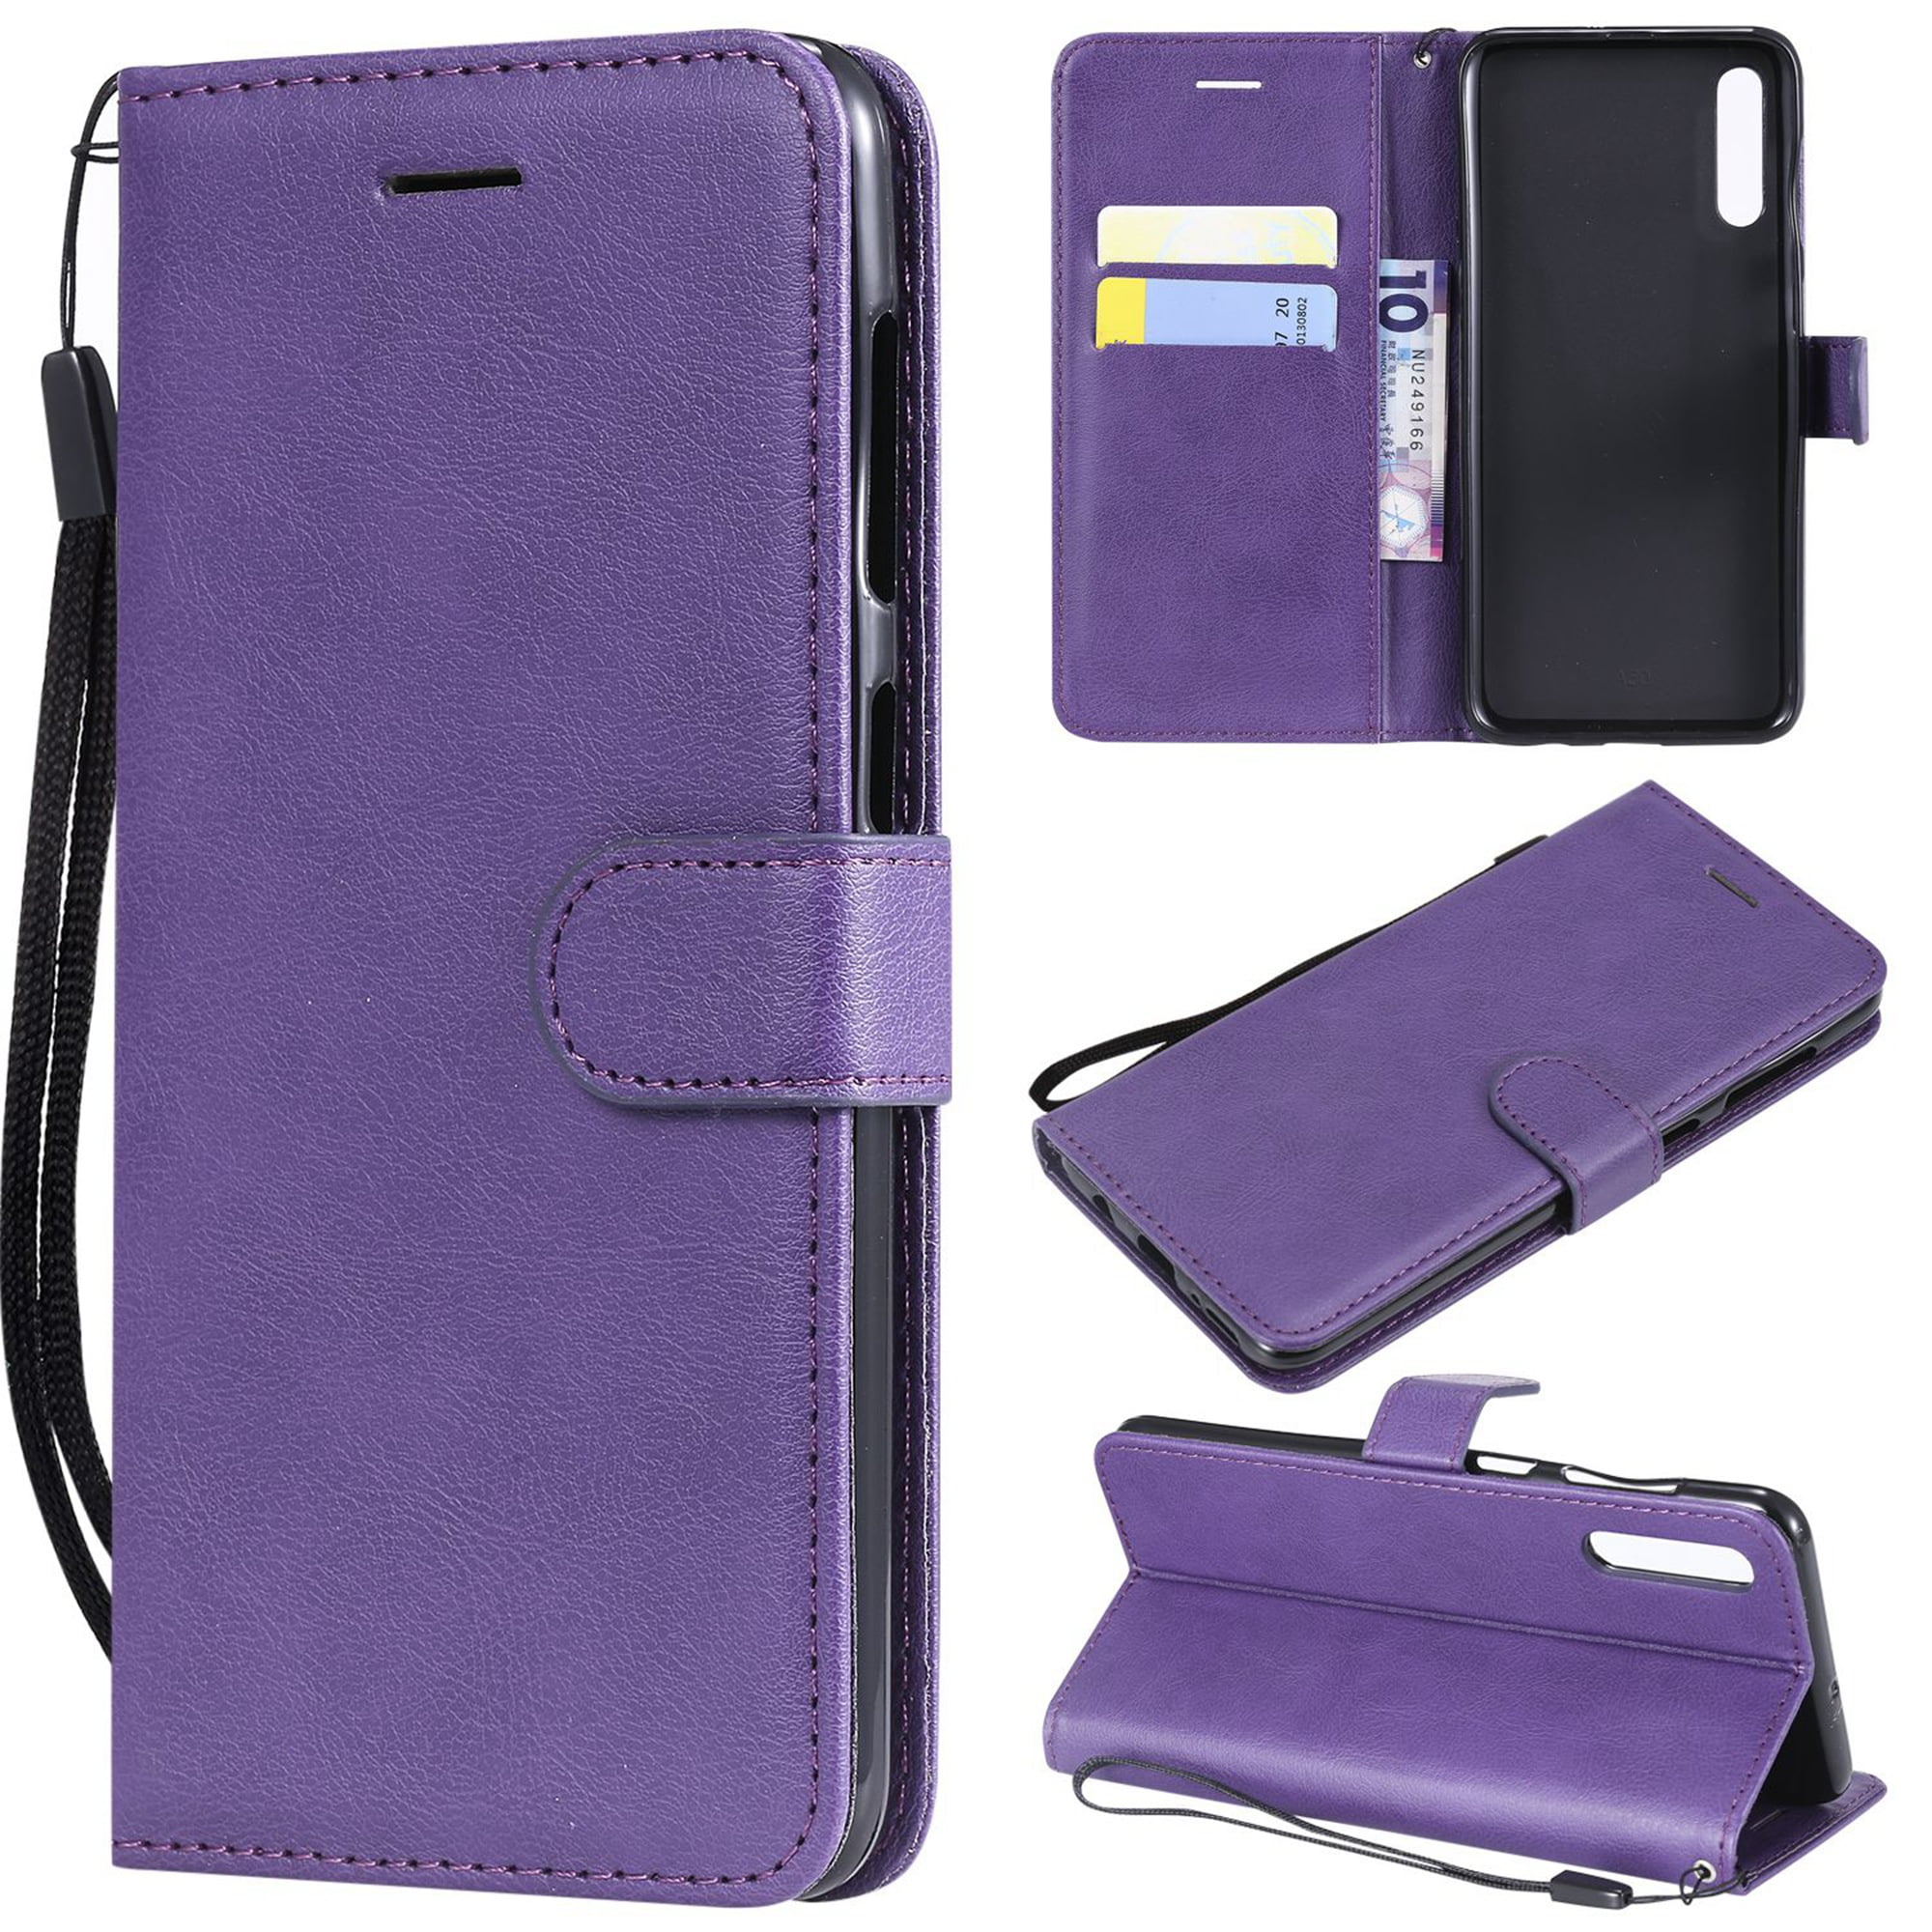 Dteck Wallet Case For Samsung Galaxy A50, Pure Color Slim PU Leather ...